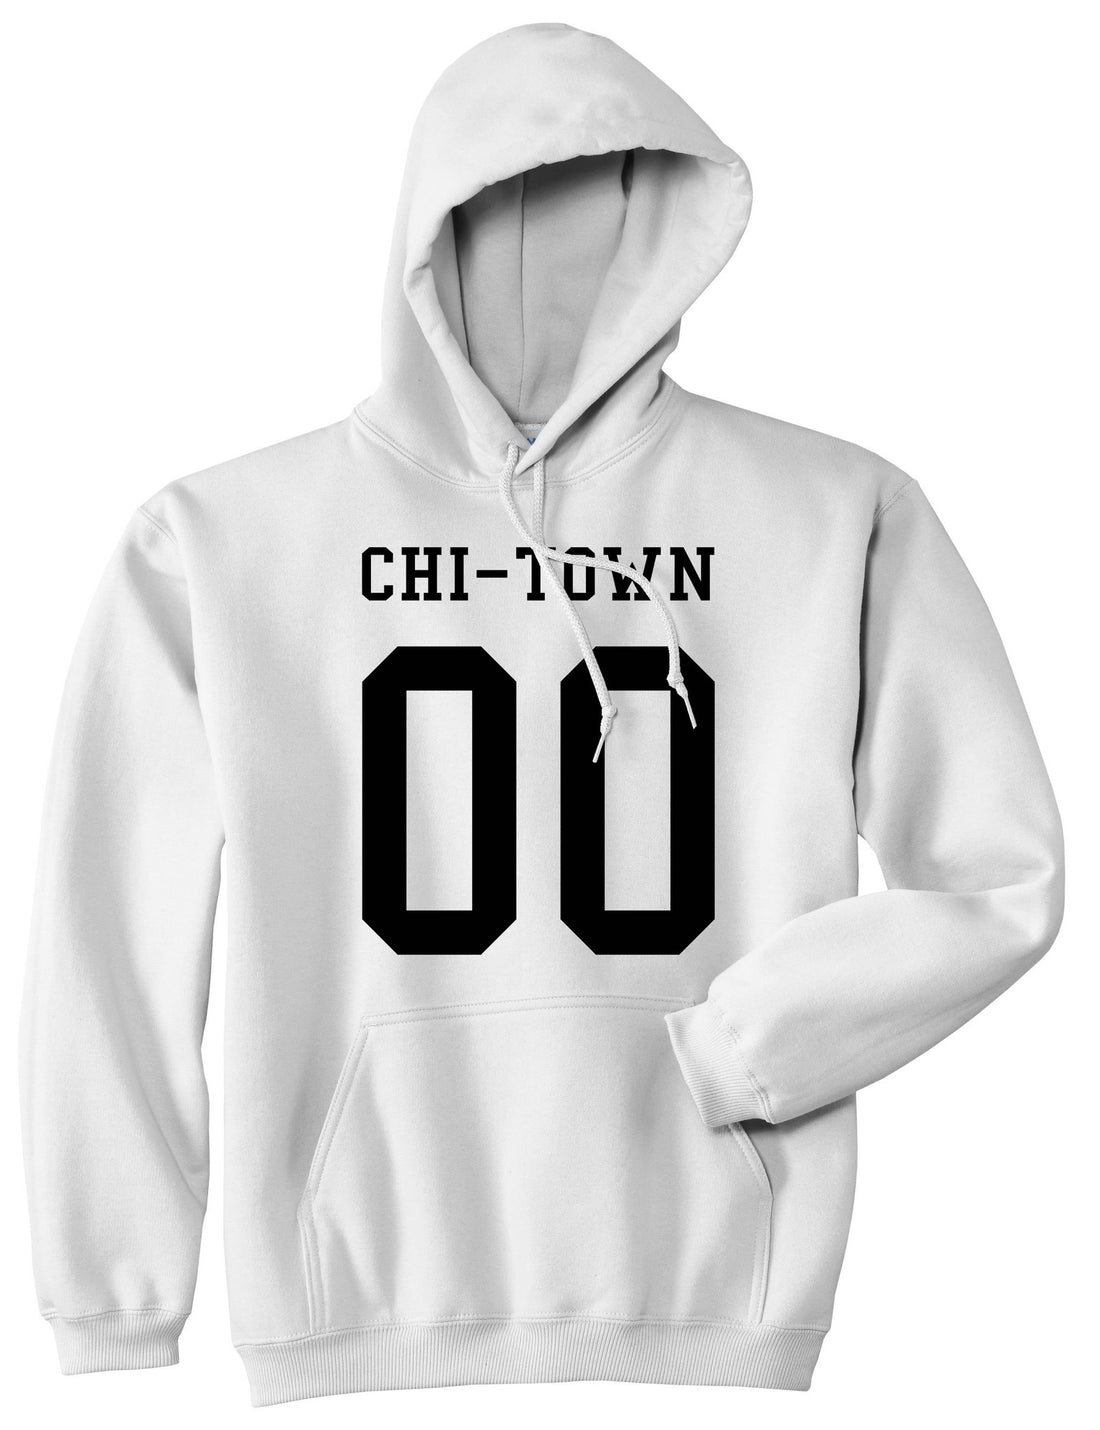 Chitown Team 00 Chicago Jersey Boys Kids Pullover Hoodie Hoody in White By Kings Of NY